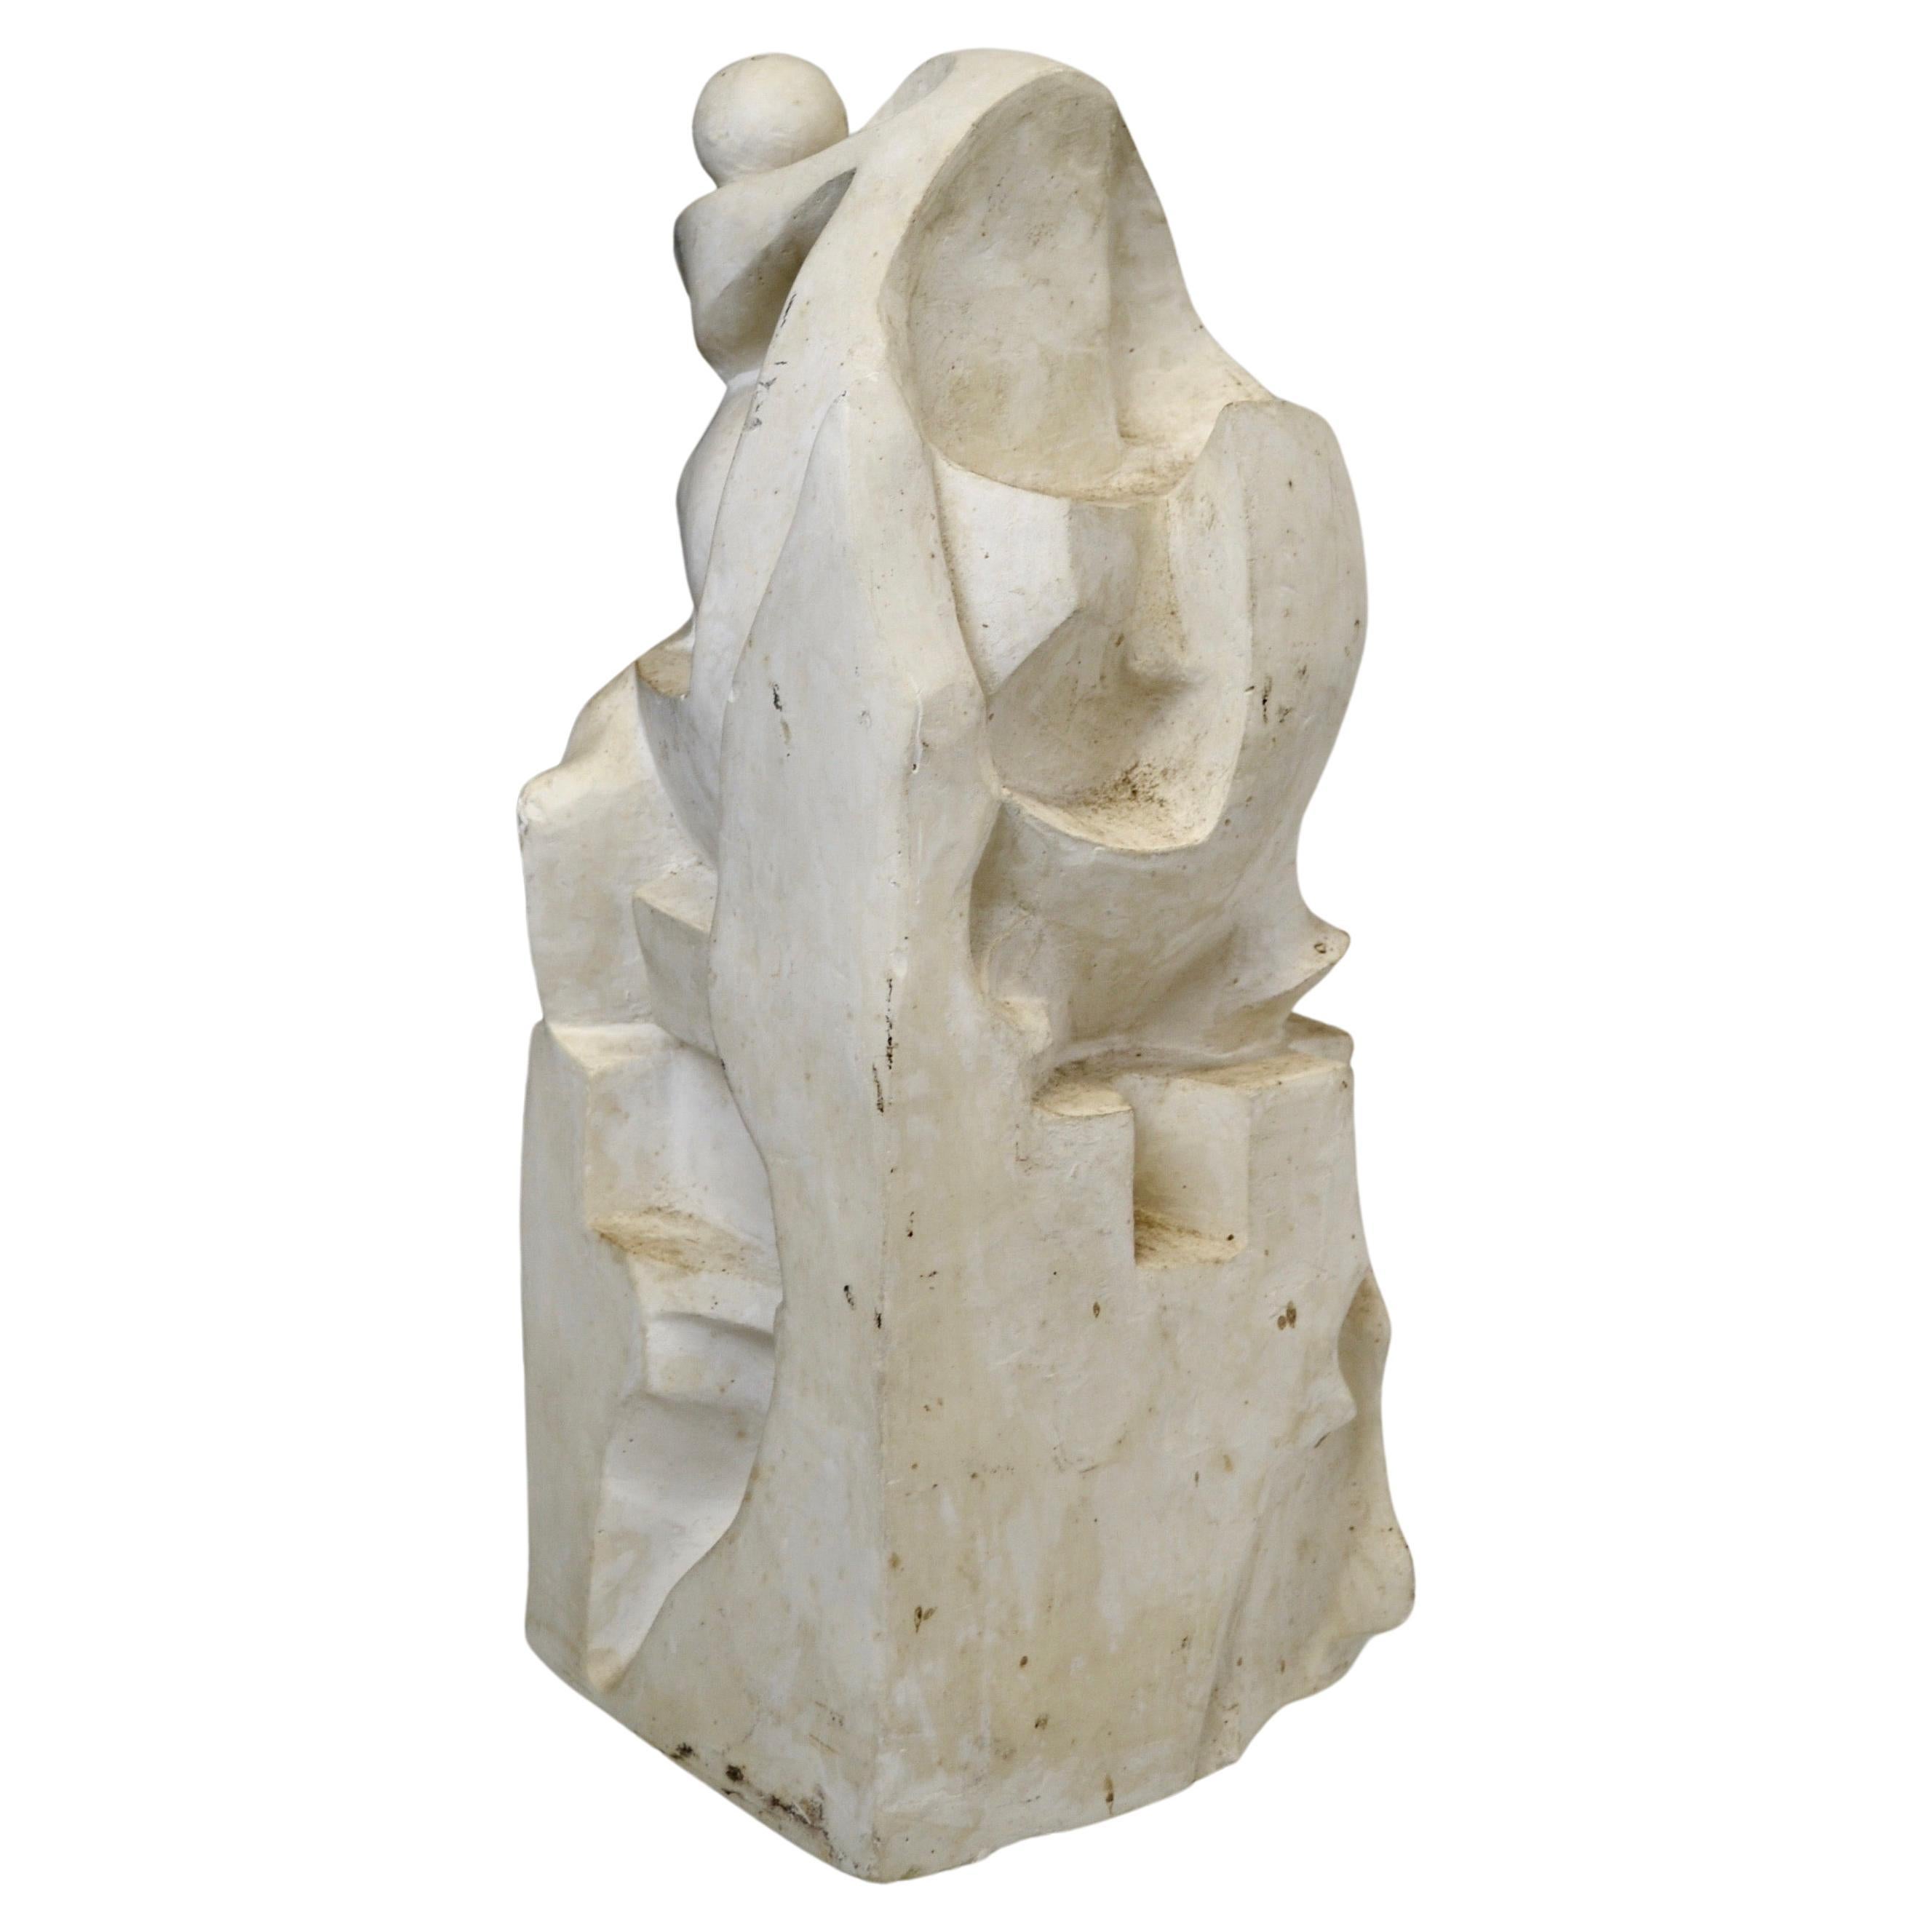 his plaster sculpture from the 1950s hails from a workshop located in the southern region of France. 
Despite bearing a few minor imperfections, it stands as a quintessential example of artistic endeavors from the 1950s. Its aesthetic is reminiscent